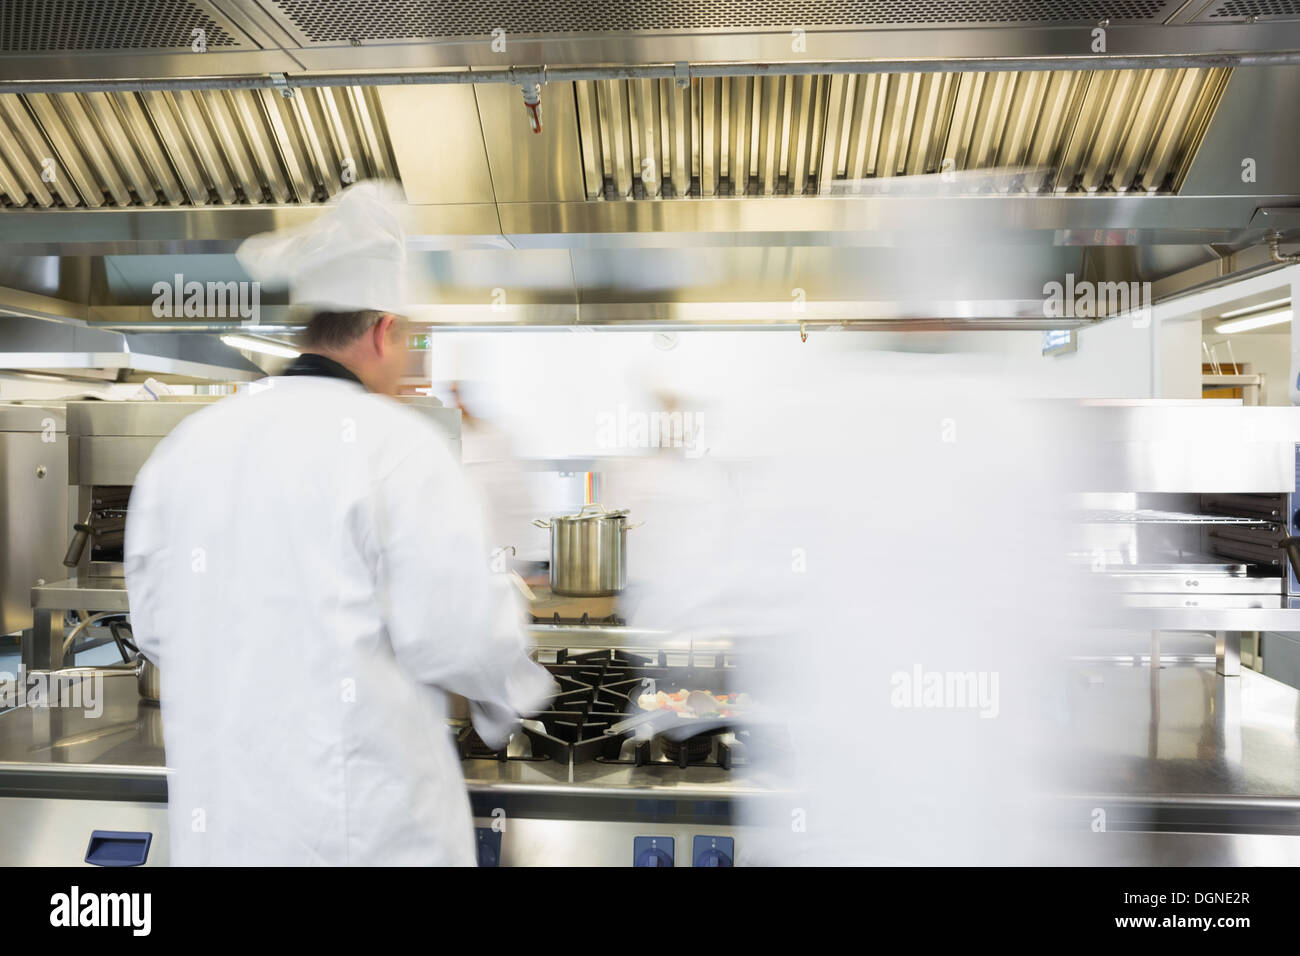 Chefs working in a kitchen Stock Photo